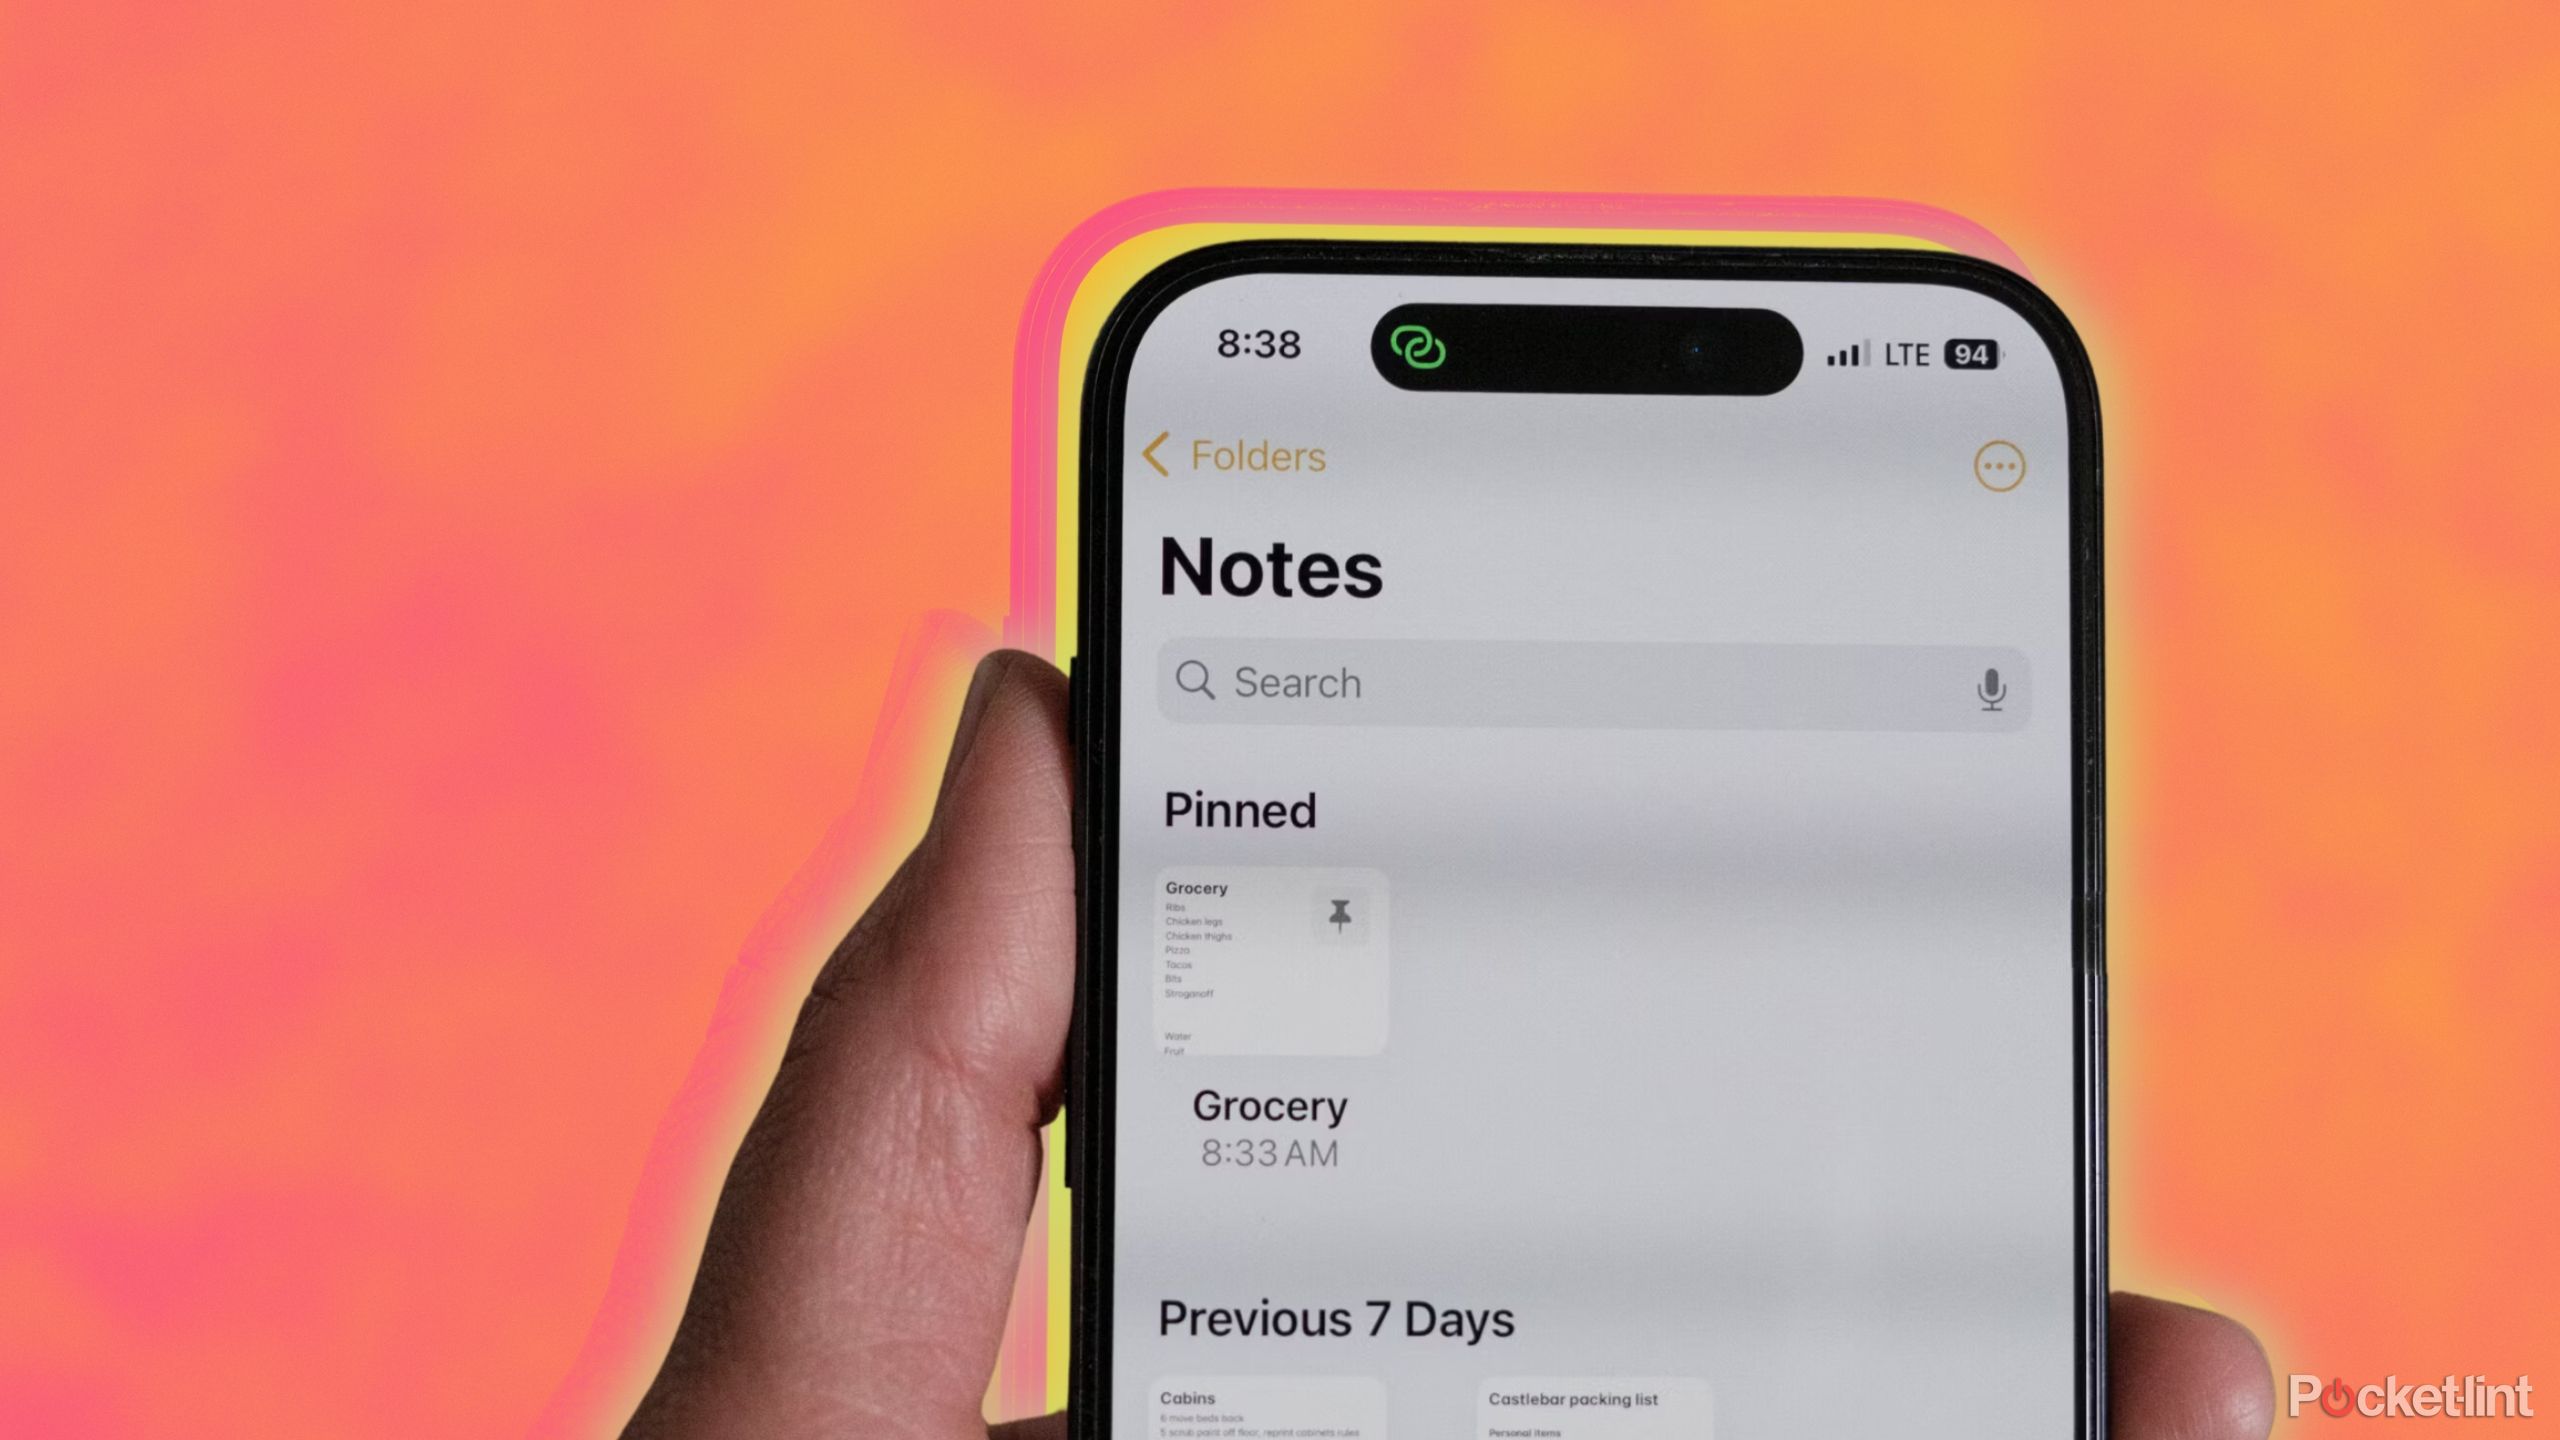 Apple Notes app on an iPhone that someone is holding against an orange background.